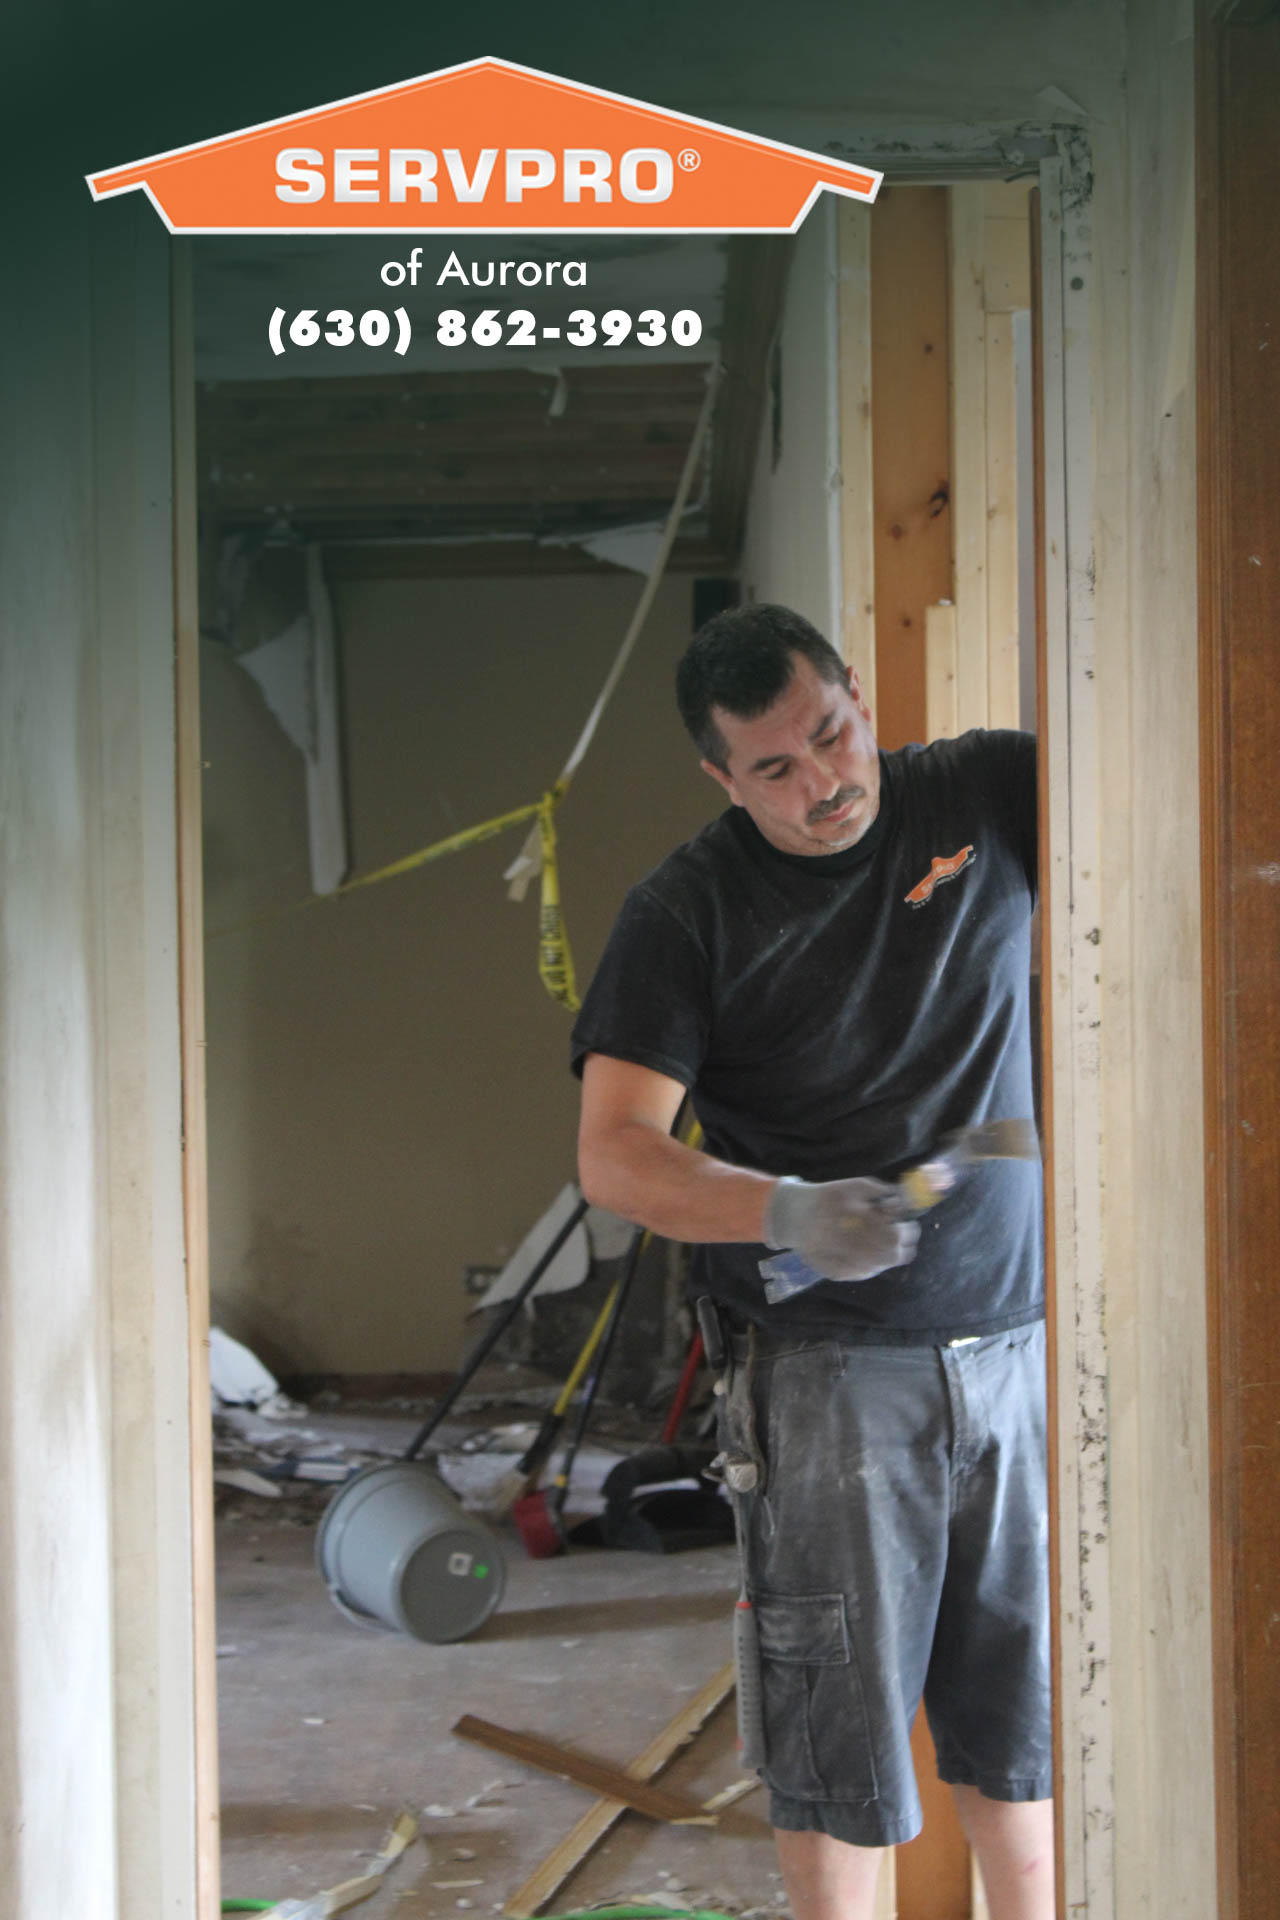 Our SERVPRO of Aurora team has the experience, expertise, and equipment needed to properly and efficiently handle any size loss in Aurora, IL, and surrounding areas.